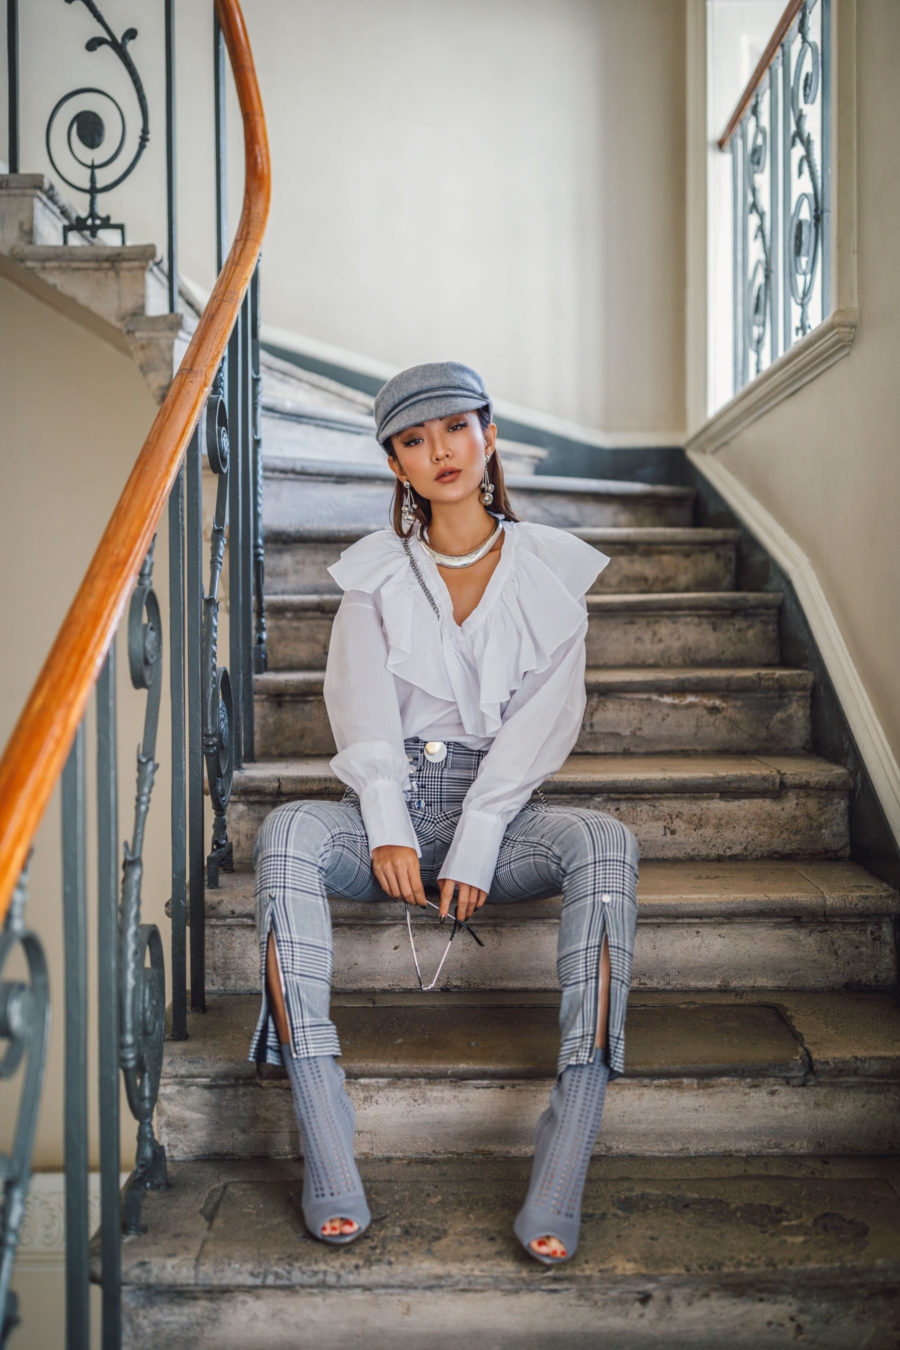 jessica wang wearing a white ruffle shirt, gray plaid pants, and peep toe ankle boots while sharing her favorite out of the box accessories to elevate your outfits // Jessica Wang - Notjessfashion.com